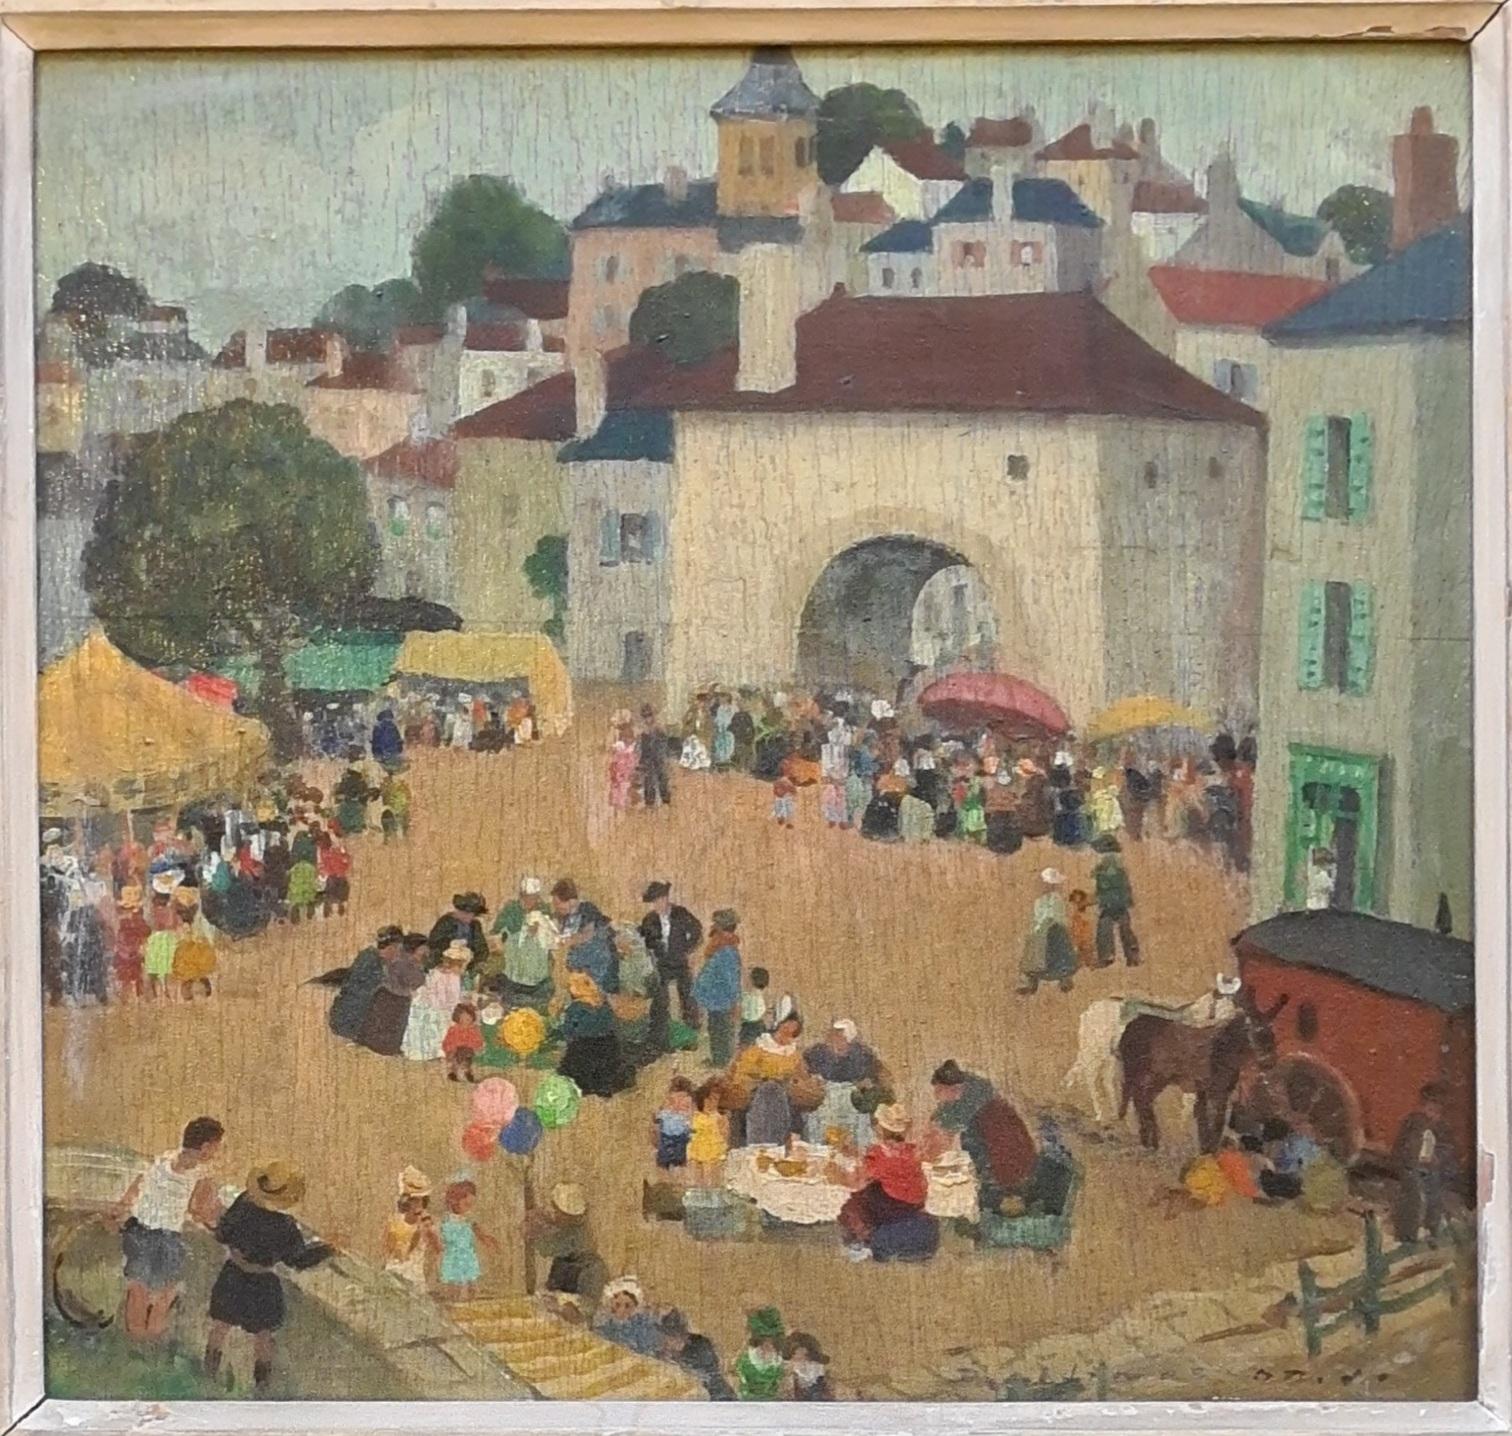 Colourful MidCentury Village Scene, Hommage to Brueghel, All the Fun of the Fair